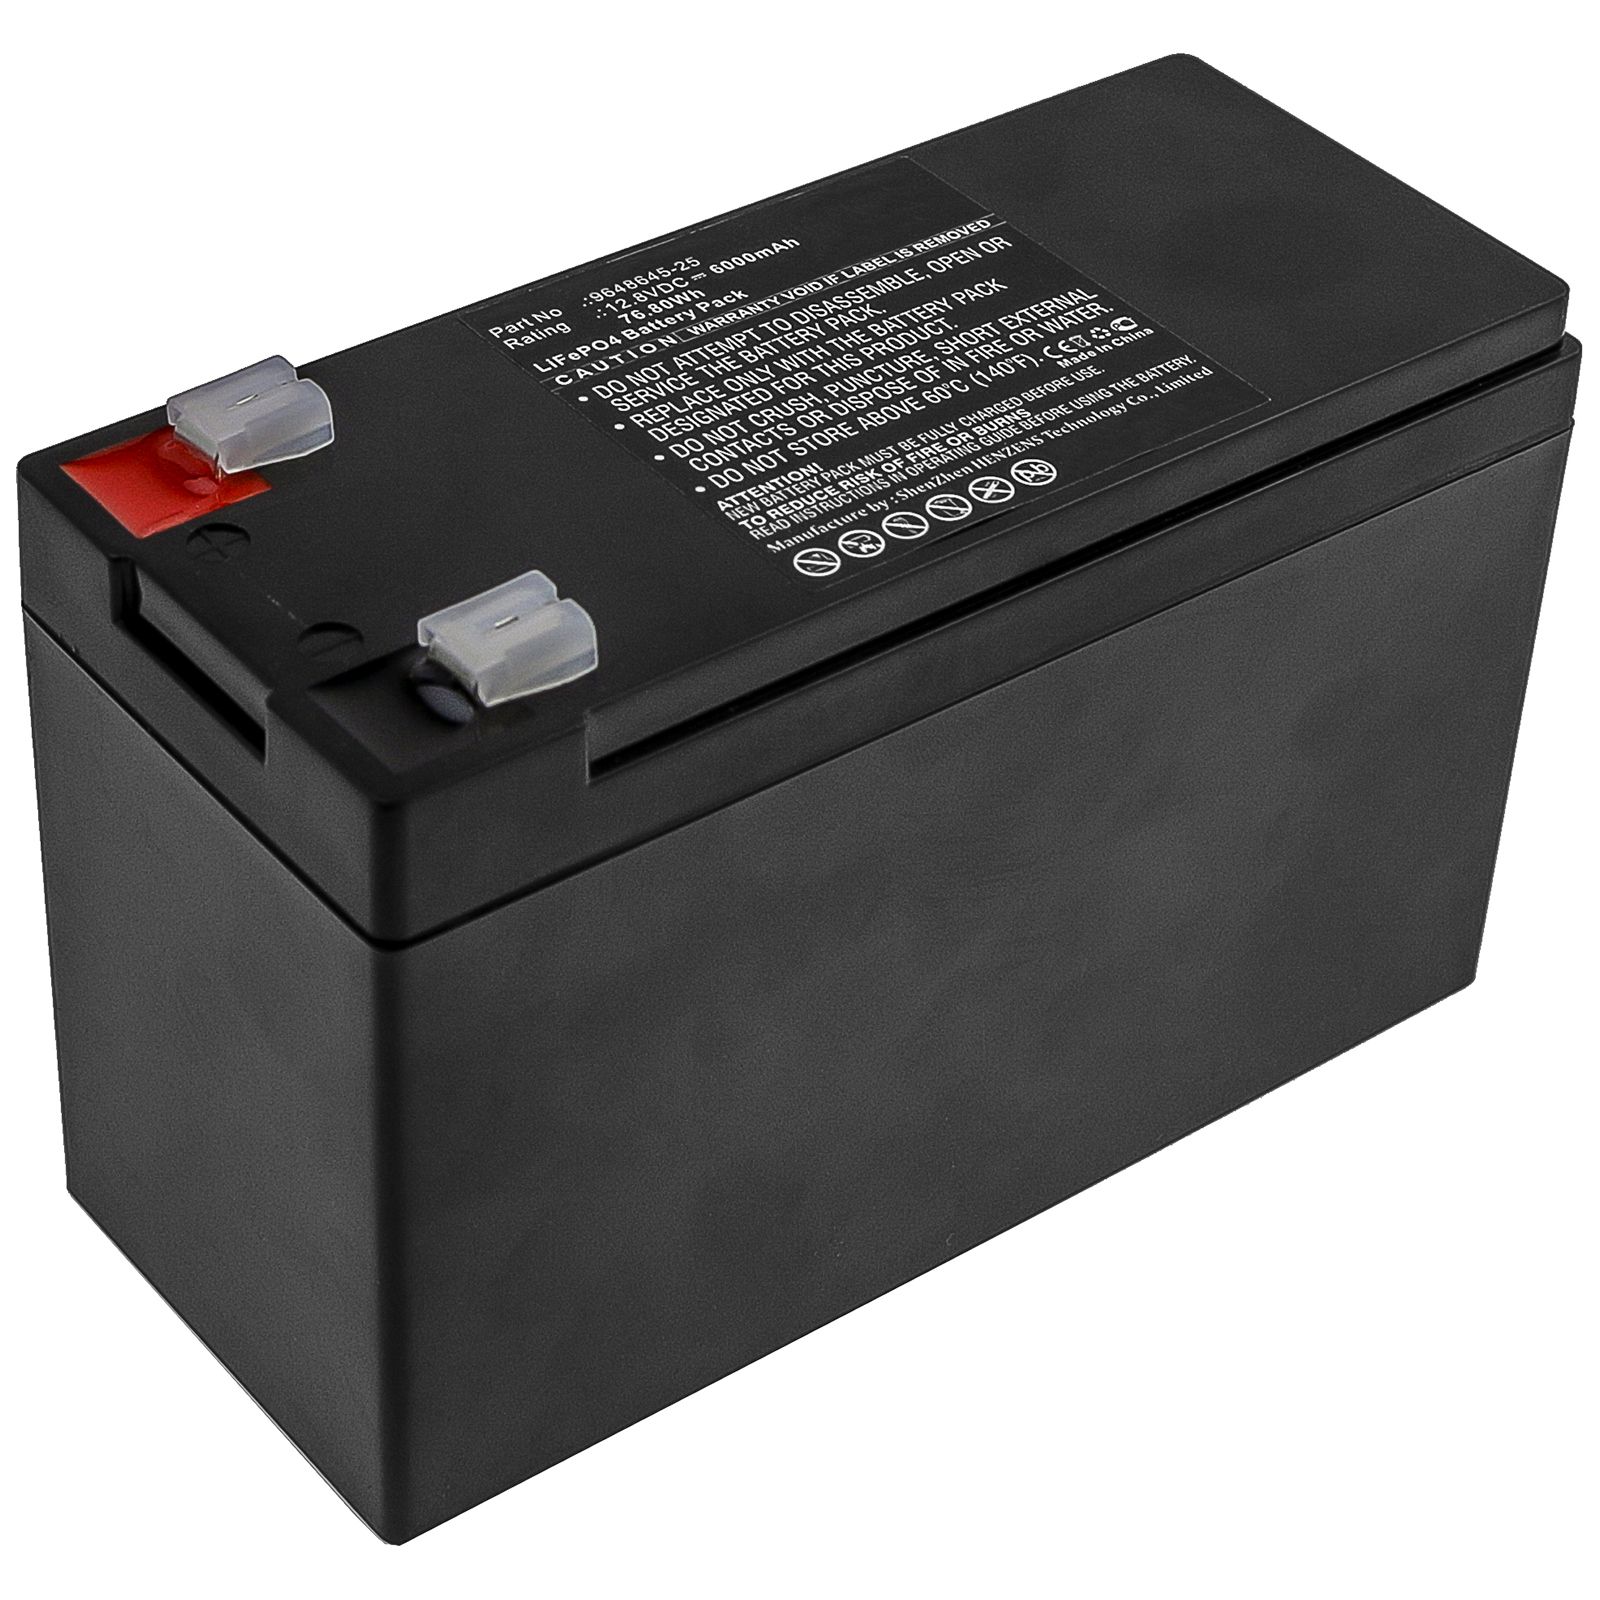 Synergy Digital Lawn Mower Battery, Compatible with Flymo 9648645-25 Lawn Mower Battery (12.8V, LiFePO4, 6000mAh)